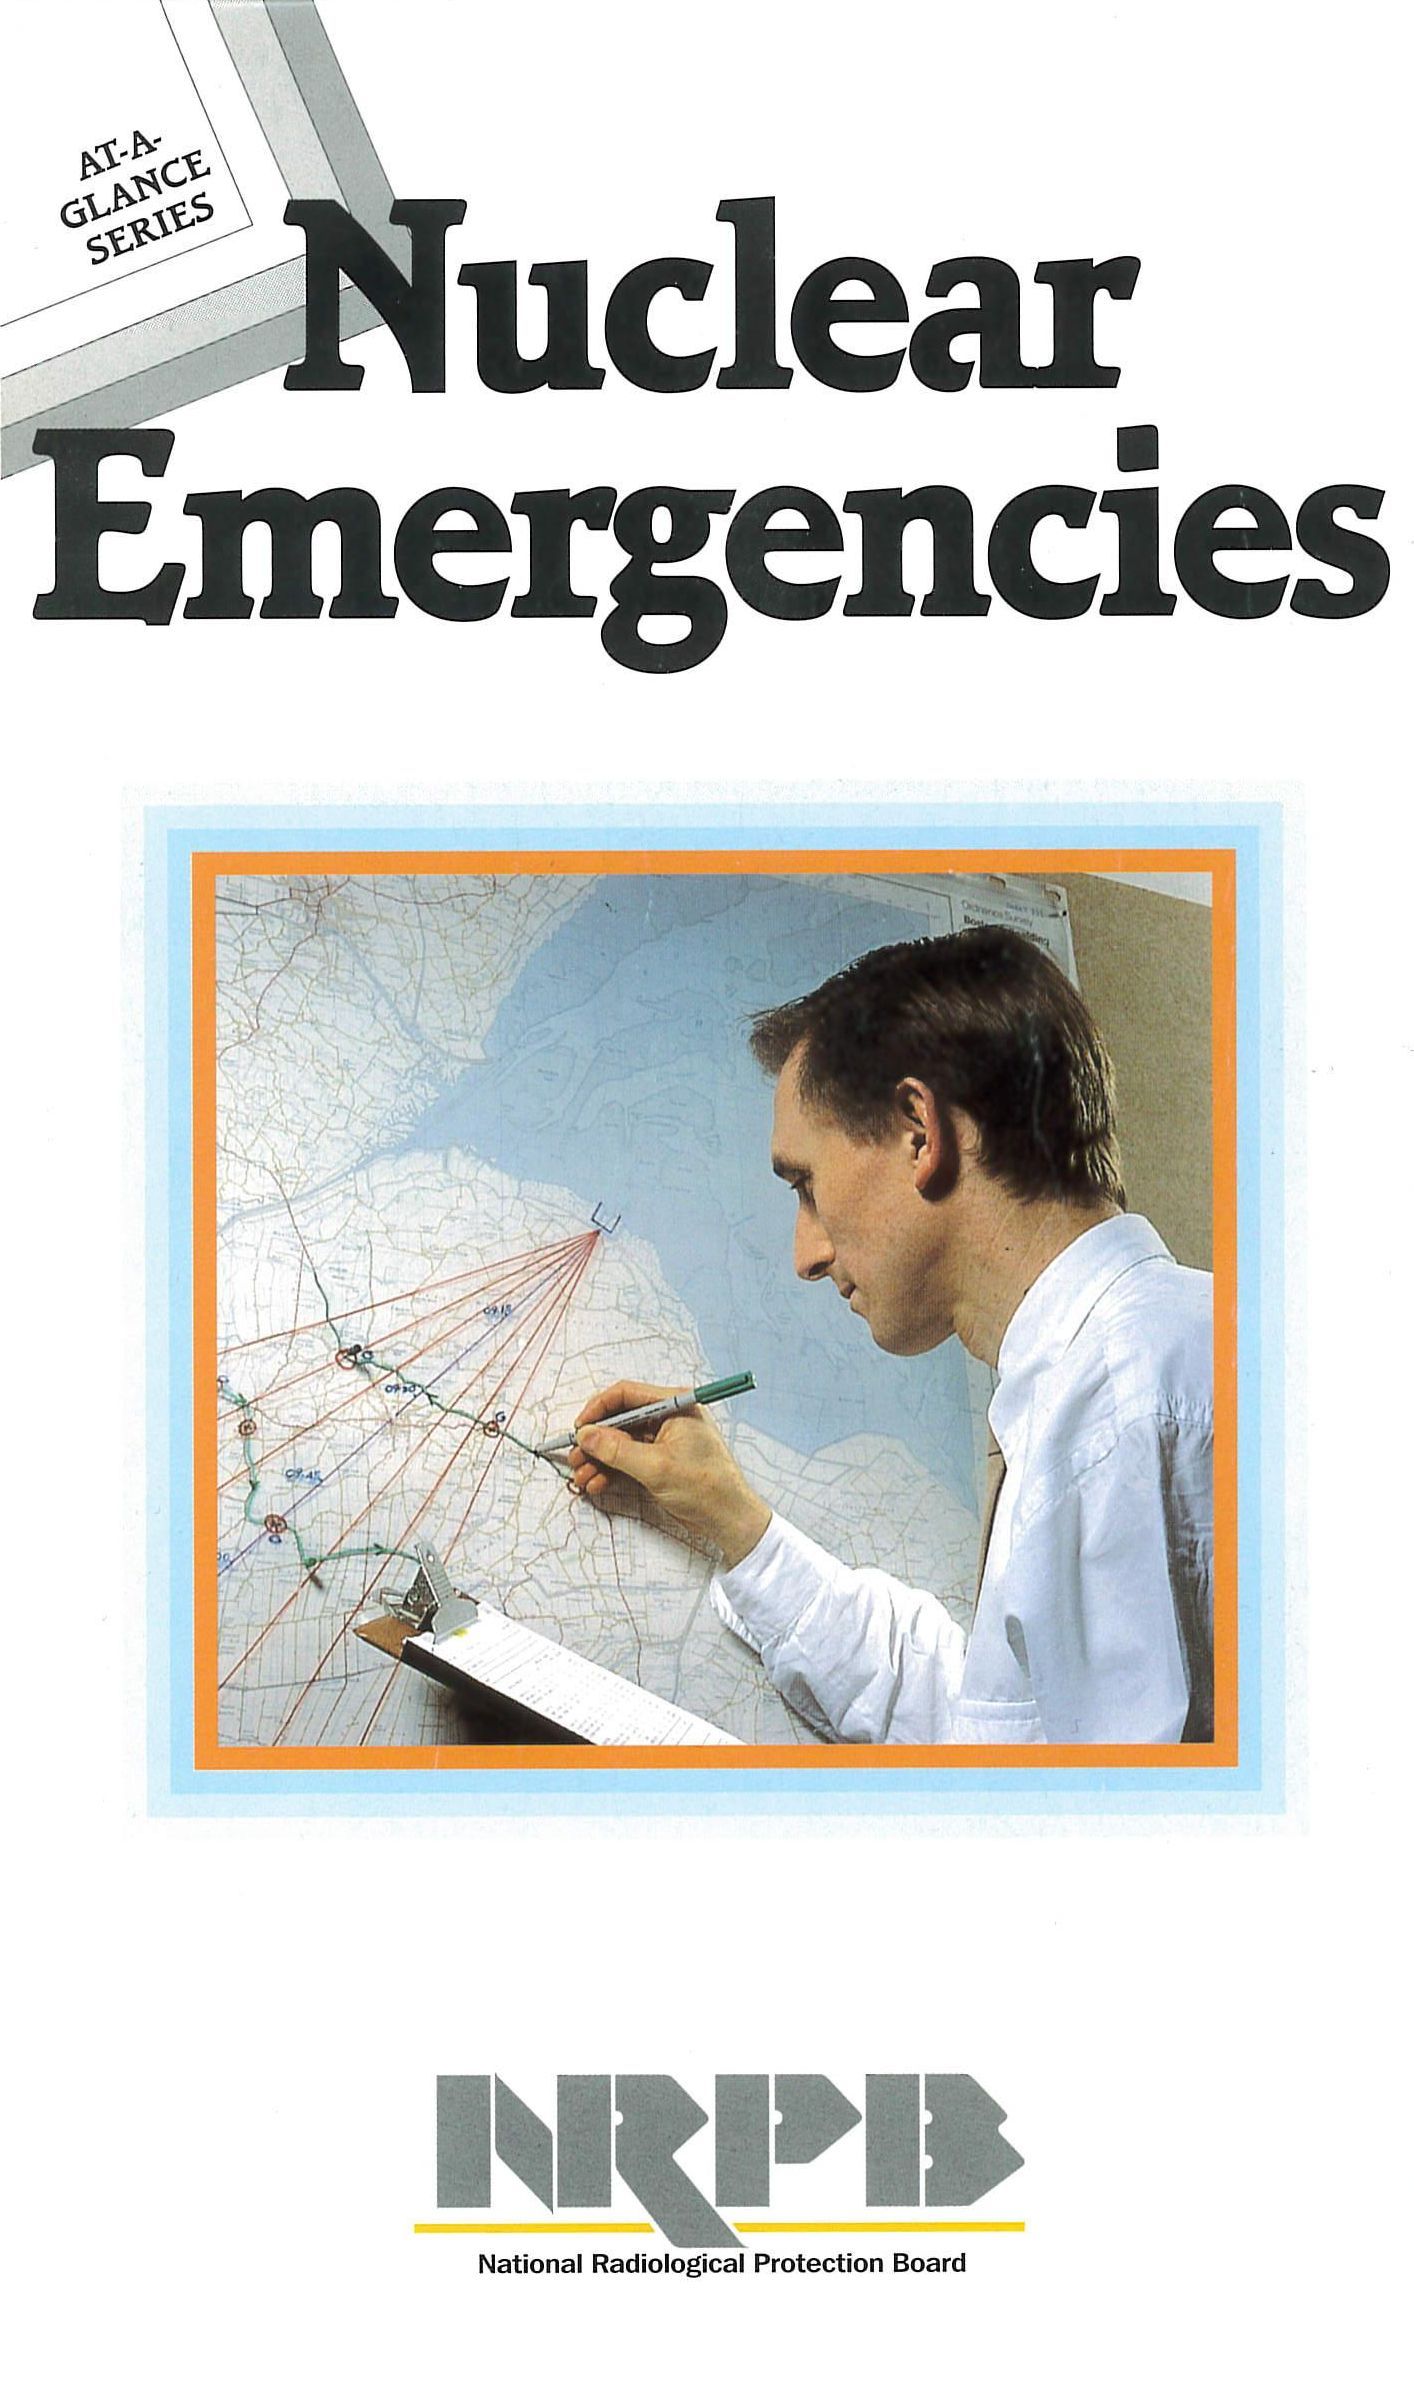 Nuclear Emergencies, At-A-Glance Series, National Radiological Protection Board, 2nd edition, 1997.